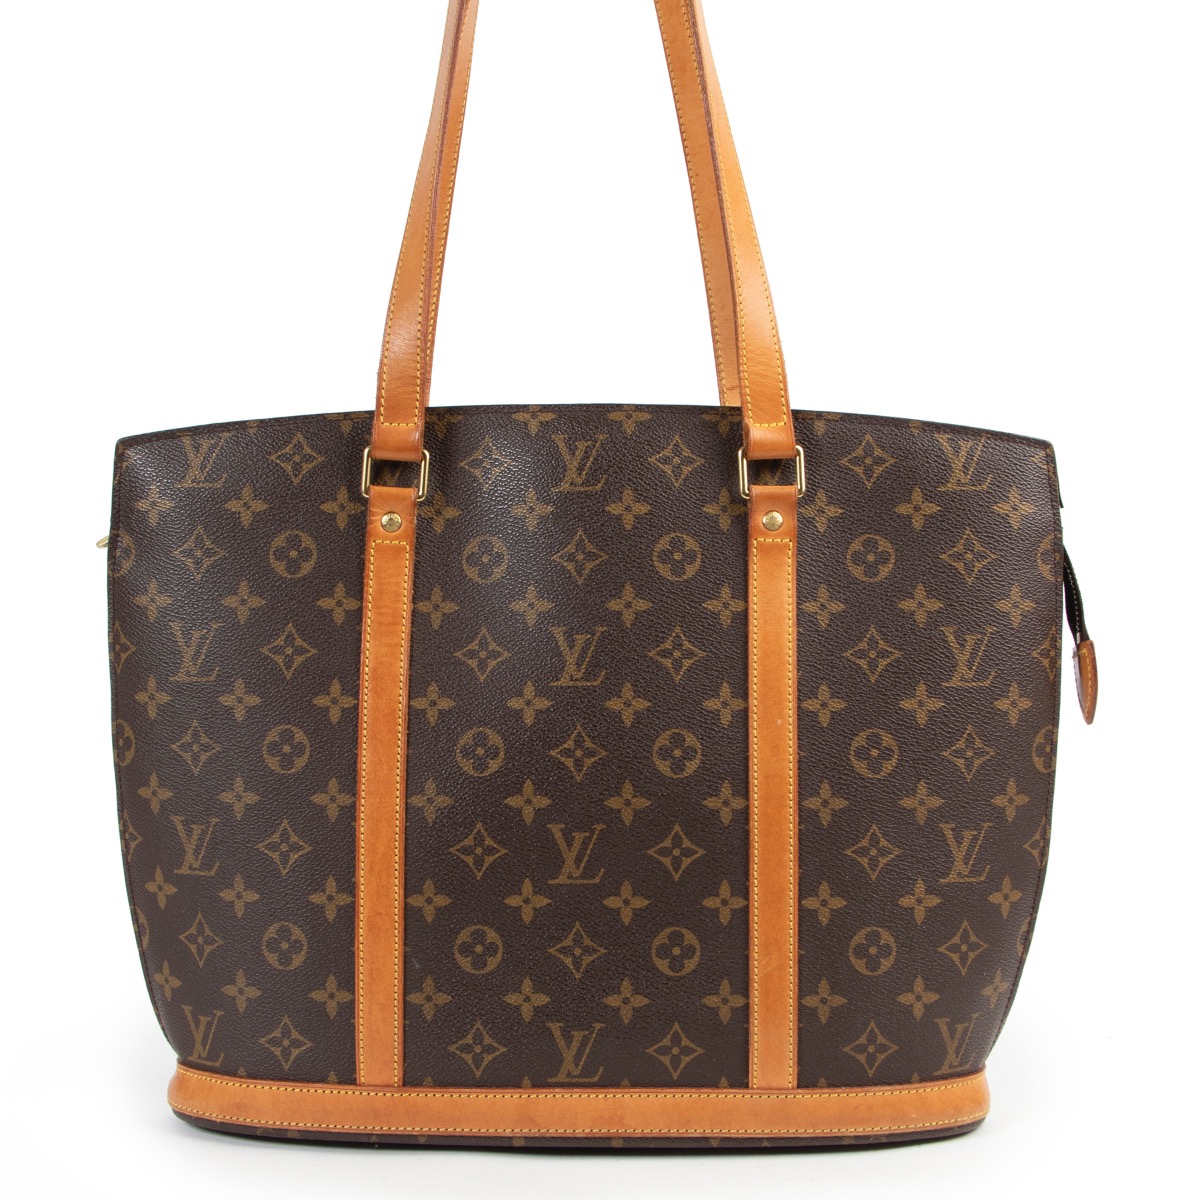 Authentic Louis Vuitton Bags - 129 For Sale on 1stDibs  genuine louis  vuitton bags for sale, gently used authentic louis vuitton bags, louis  vuitton authentic bags for sale